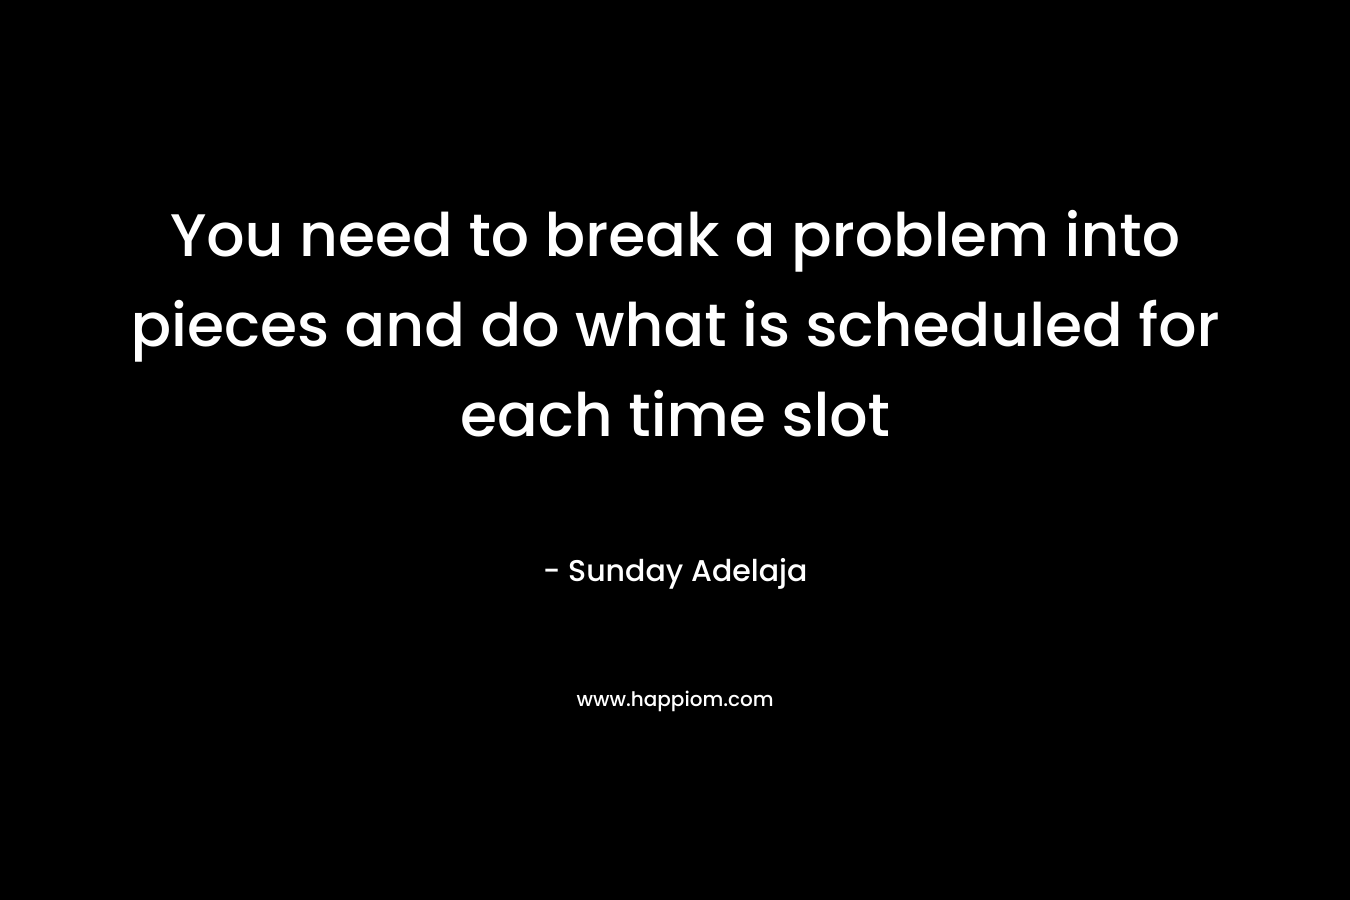 You need to break a problem into pieces and do what is scheduled for each time slot